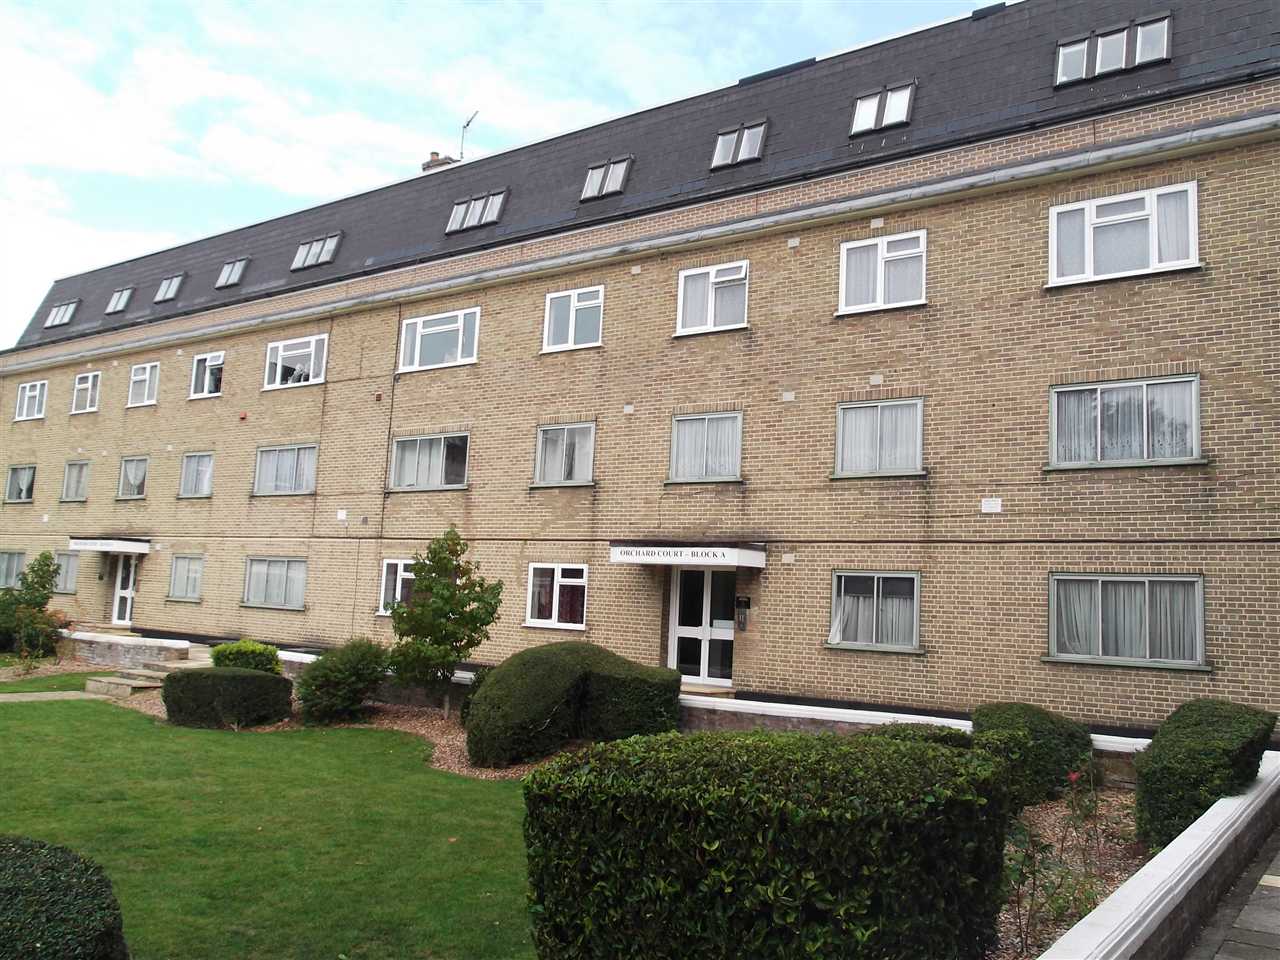 Orchard Court, Stonegrove